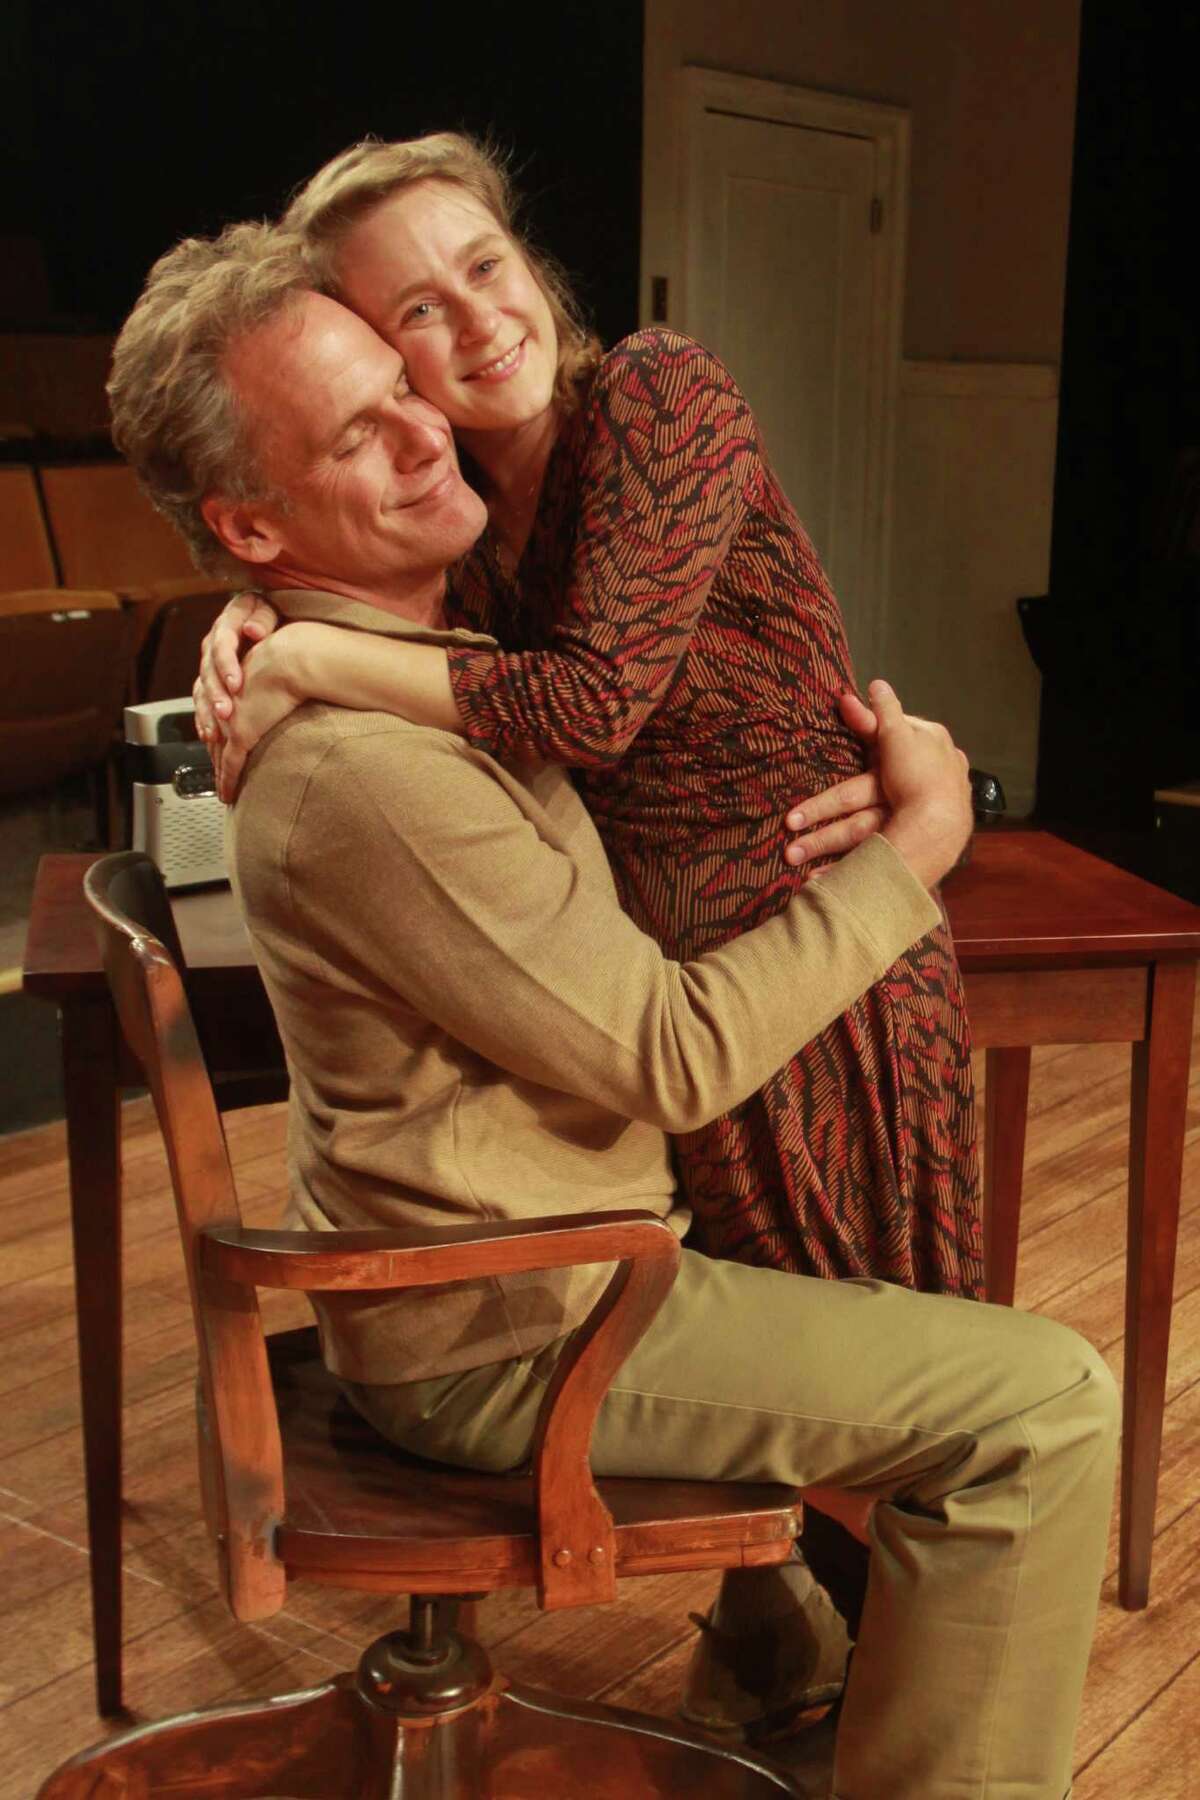 (For the Chronicle/Gary Fountain, August 25, 2013) Joe Kirkendall as Henry, and Shannon Emerick as Annie, in this scene from Main Street Theater production of Tom Stoppard's "The Real Thing."